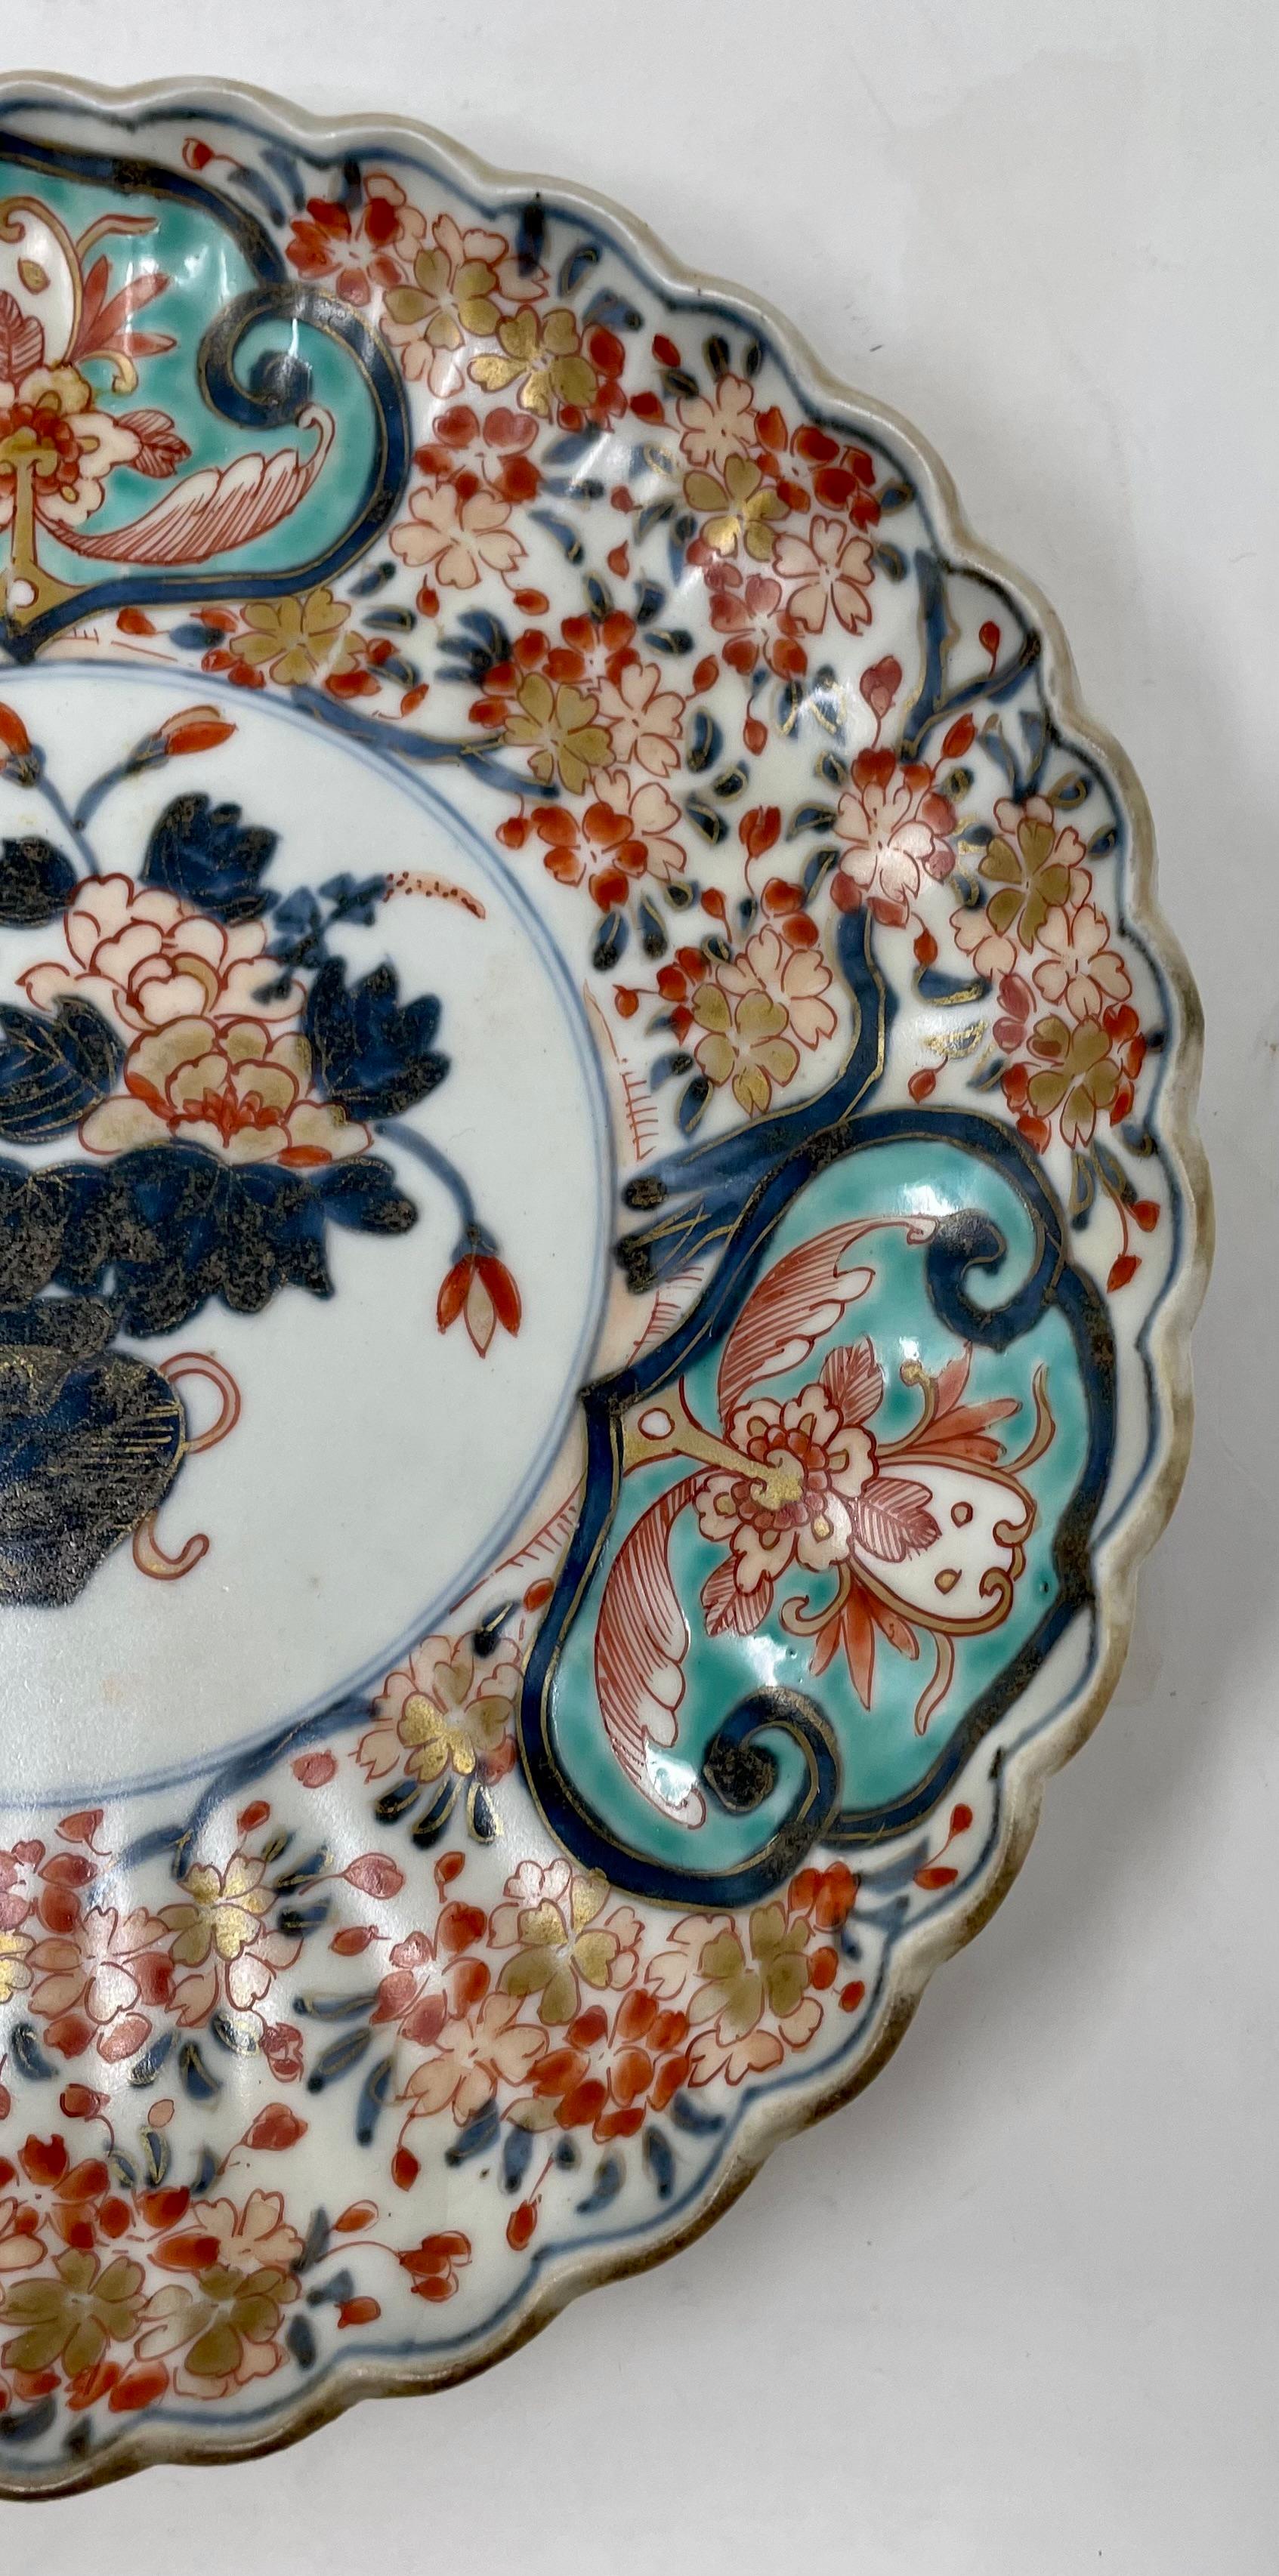 Antique Japanese Imari Porcelain 19th Century Scalloped Dish, circa 1880 In Good Condition For Sale In New Orleans, LA